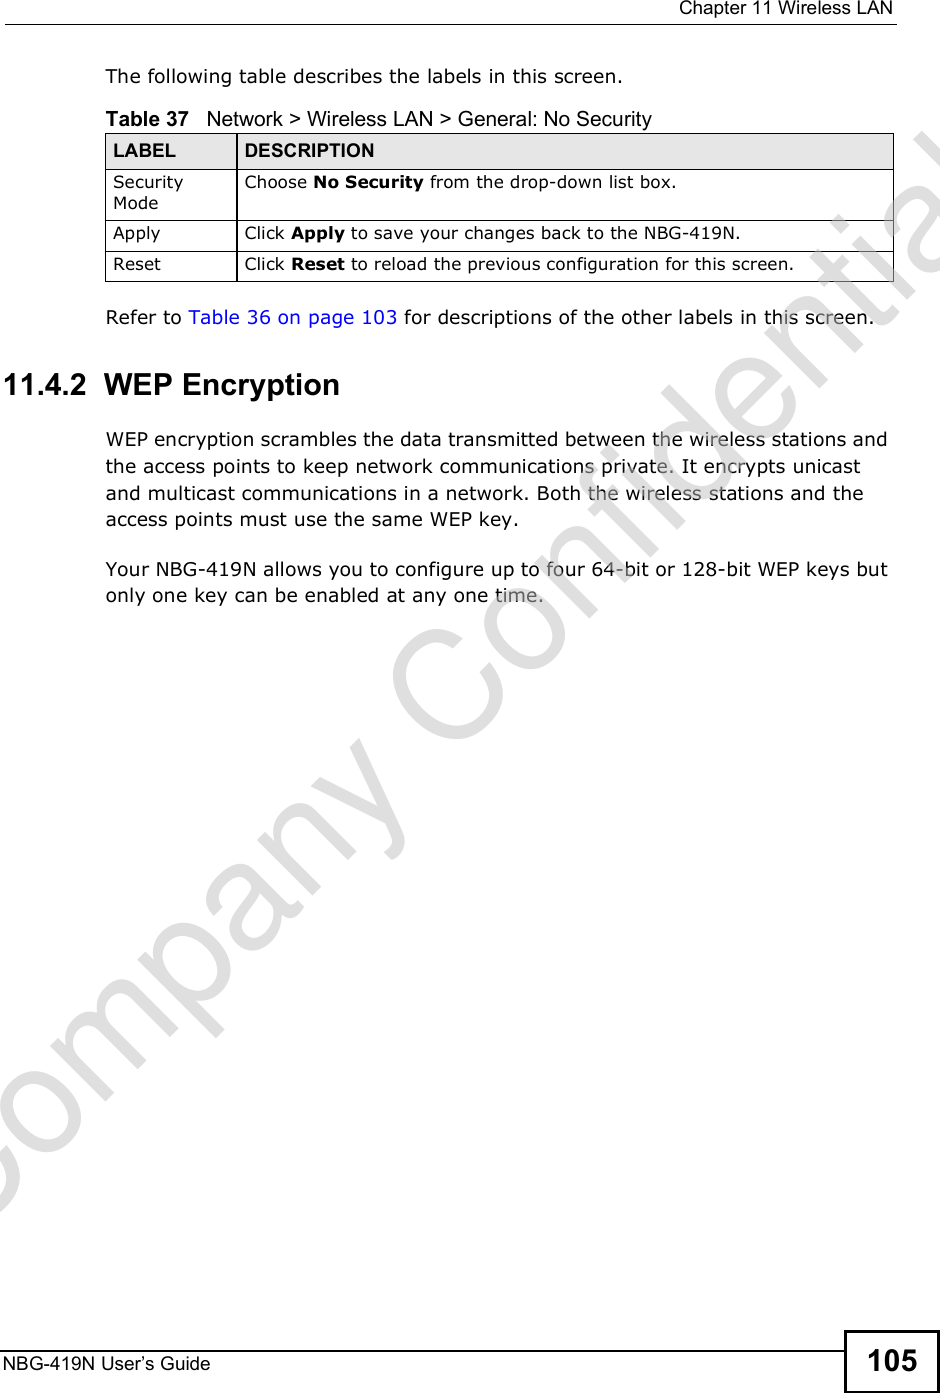  Chapter 11Wireless LANNBG-419N User s Guide 105The following table describes the labels in this screen.Refer to Table 36 on page 103 for descriptions of the other labels in this screen.11.4.2  WEP EncryptionWEP encryption scrambles the data transmitted between the wireless stations and the access points to keep network communications private. It encrypts unicast and multicast communications in a network. Both the wireless stations and the access points must use the same WEP key.Your NBG-419N allows you to configure up to four 64-bit or 128-bit WEP keys but only one key can be enabled at any one time.Table 37   Network &gt; Wireless LAN &gt; General: No SecurityLABEL DESCRIPTIONSecurity ModeChoose No Security from the drop-down list box.Apply Click Apply to save your changes back to the NBG-419N.Reset Click Reset to reload the previous configuration for this screen.Company Confidential